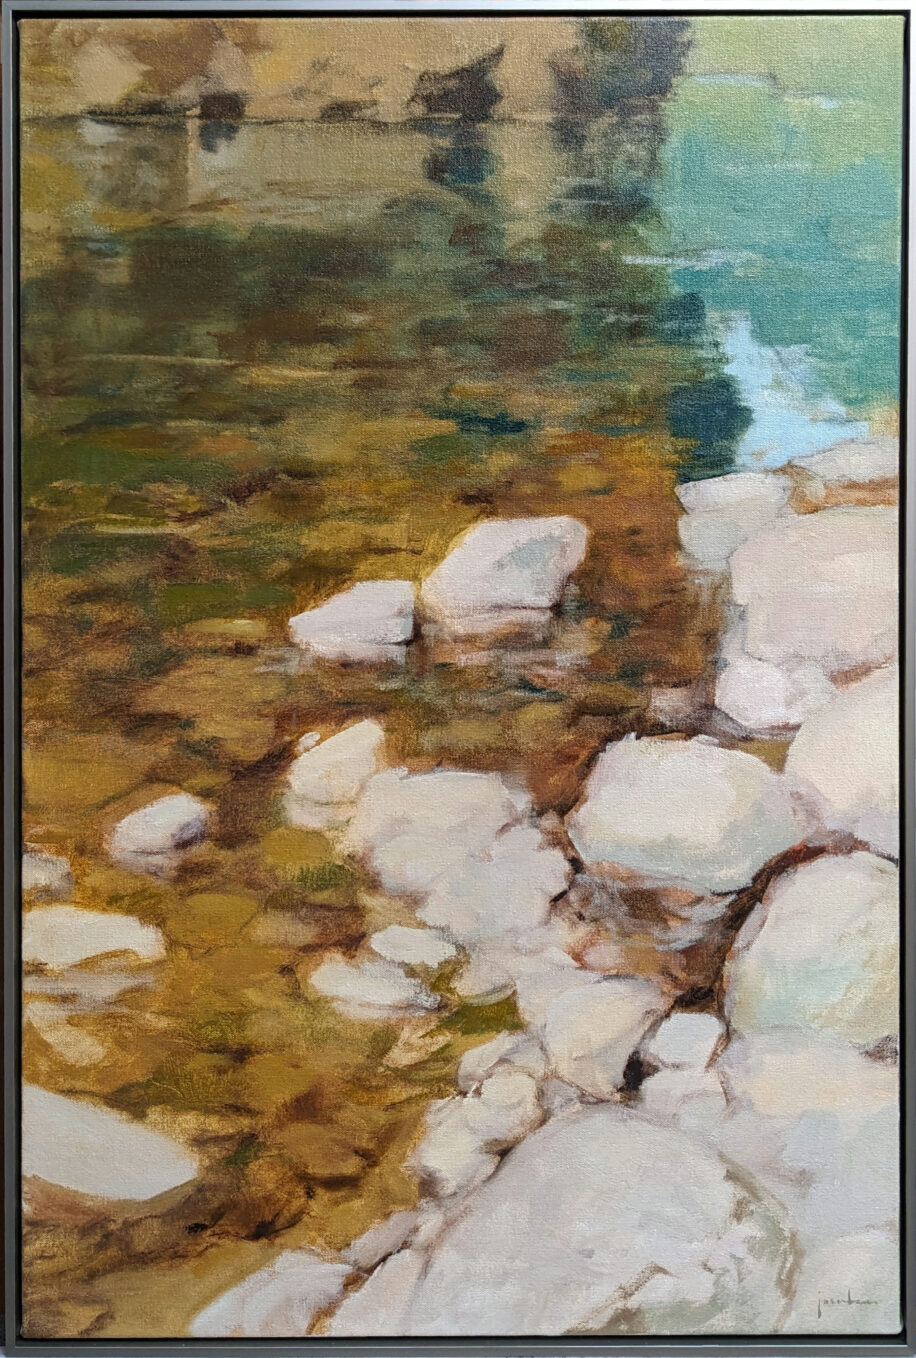 On The Rocks by Maria Josenhans at The Avenue Gallery, a contemporary fine art gallery in Victoria, BC, Canada.